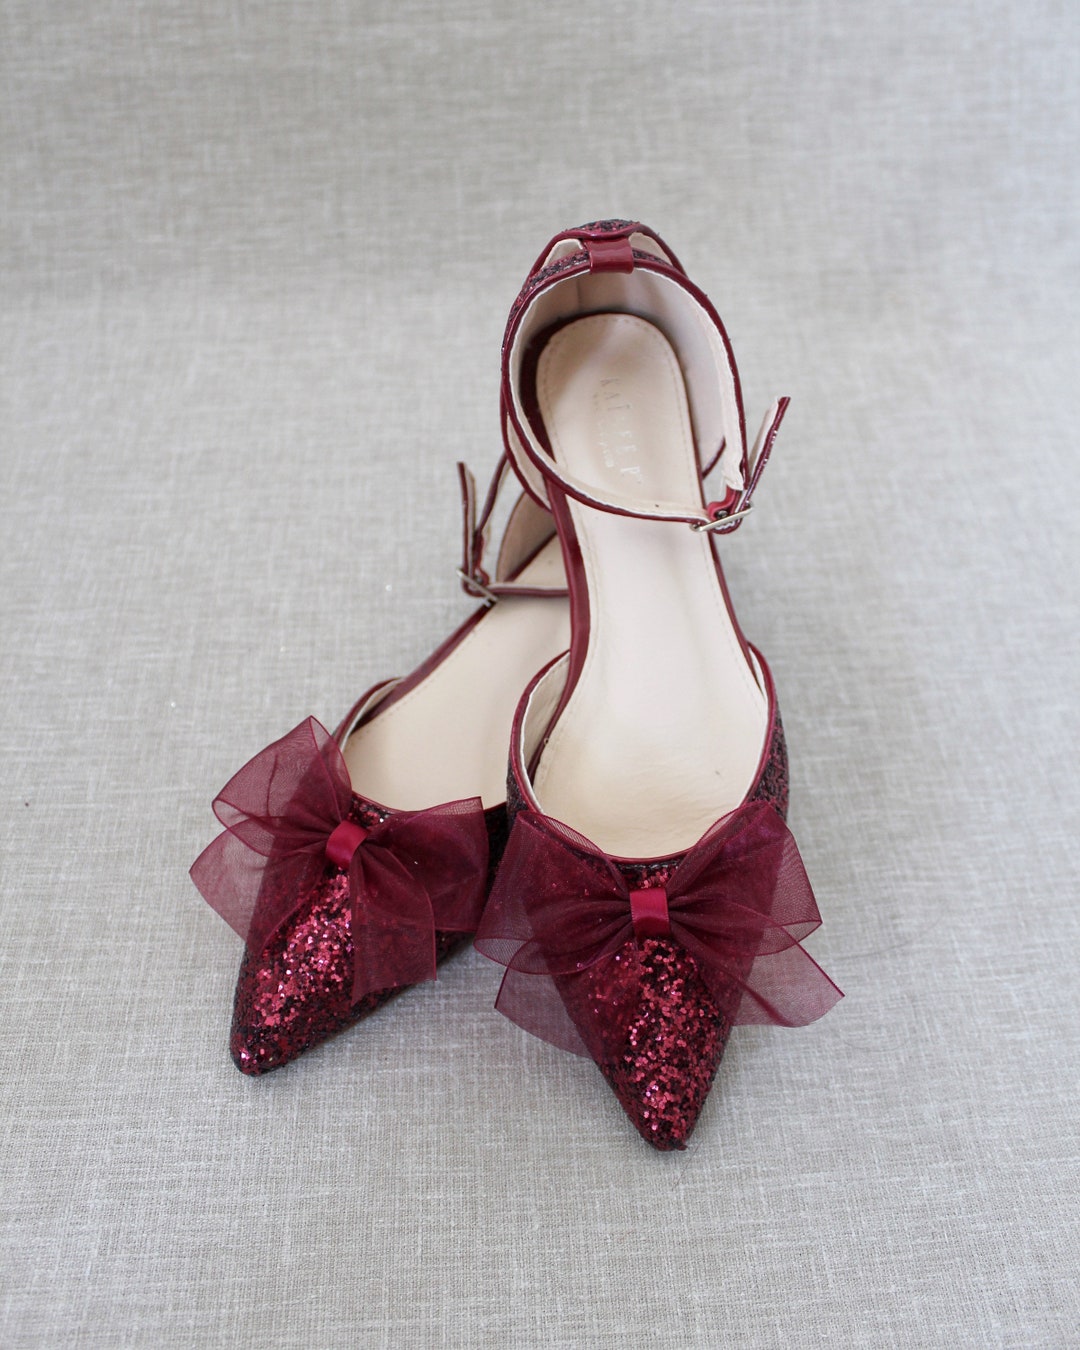 BURGUNDY Rock Glitter Pointy Toe Flats With Ankle Strap & Organza Bow ...